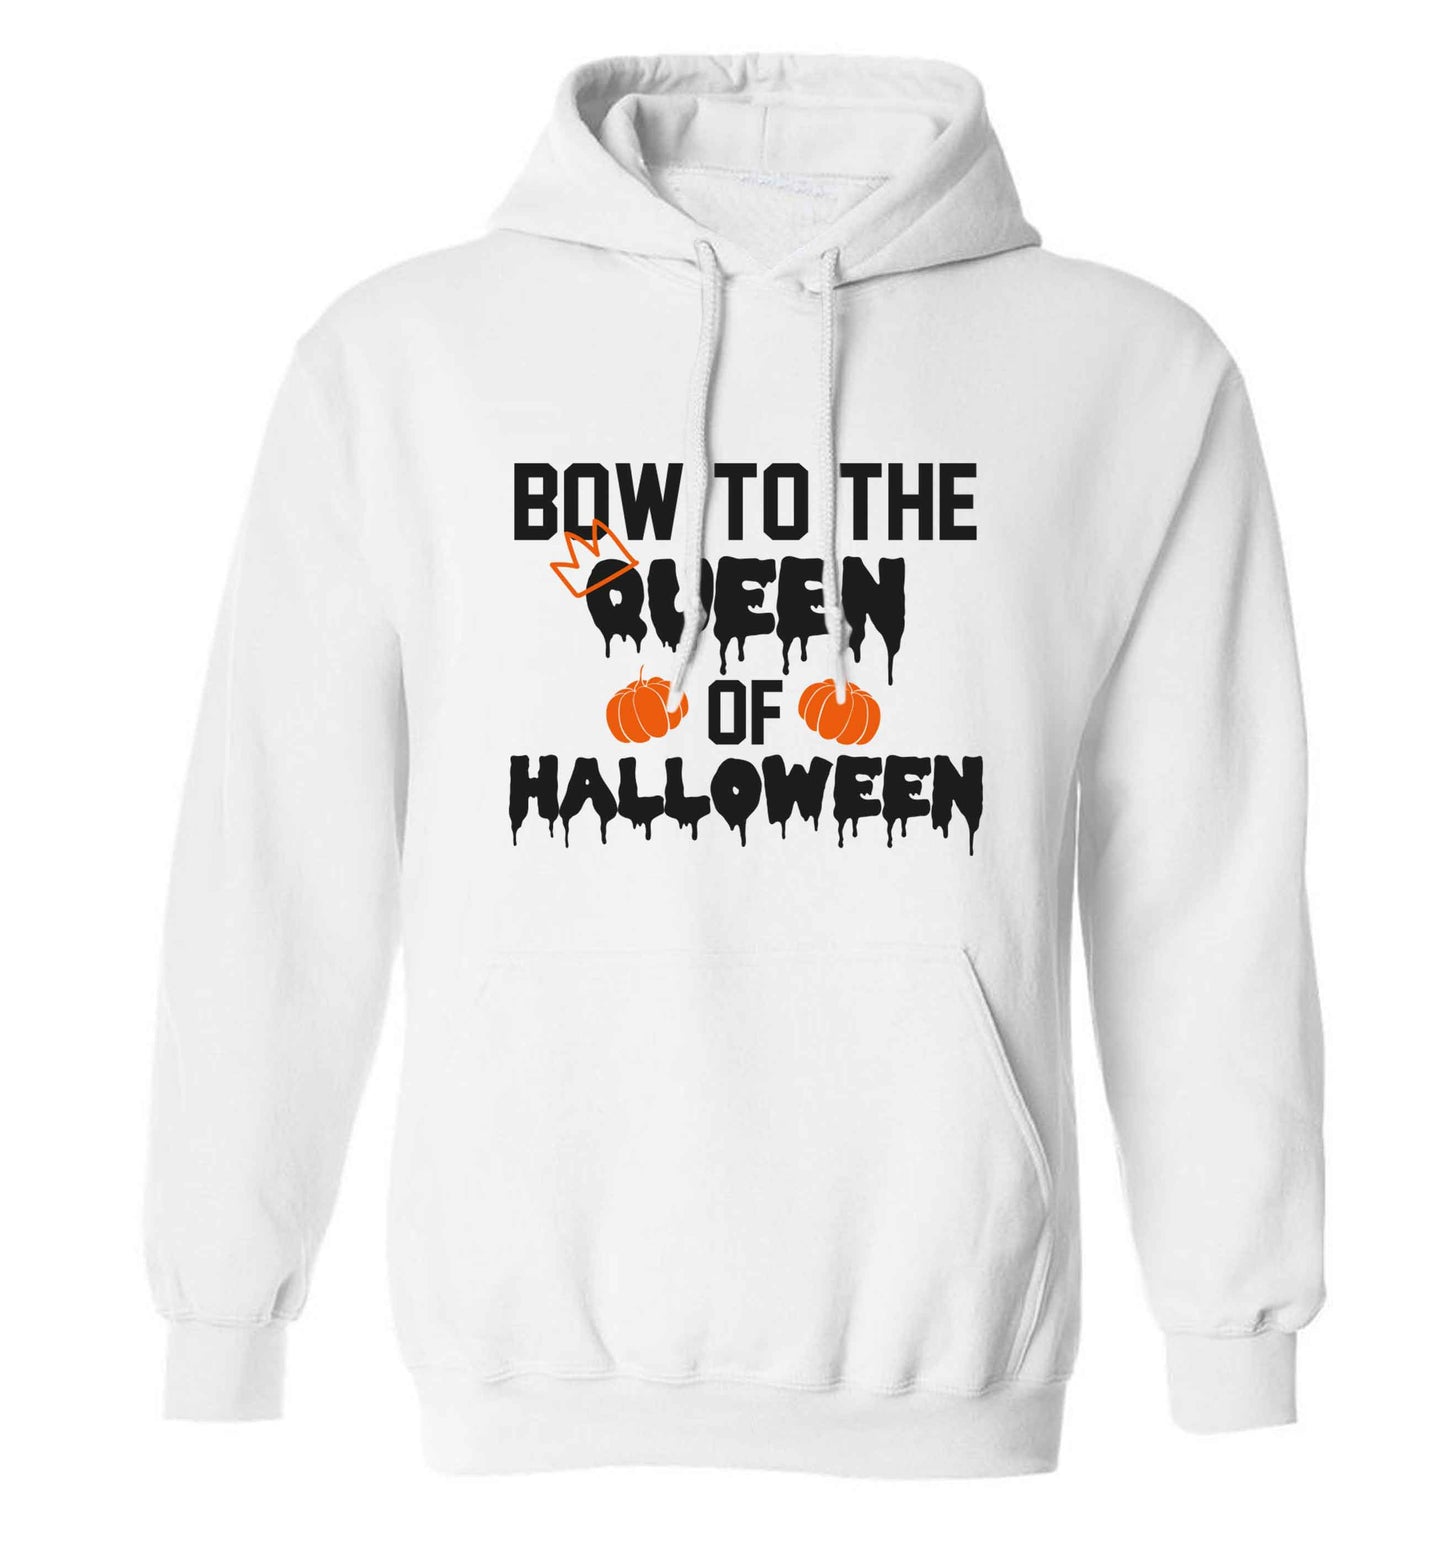 Bow to the Queen of halloween adults unisex white hoodie 2XL